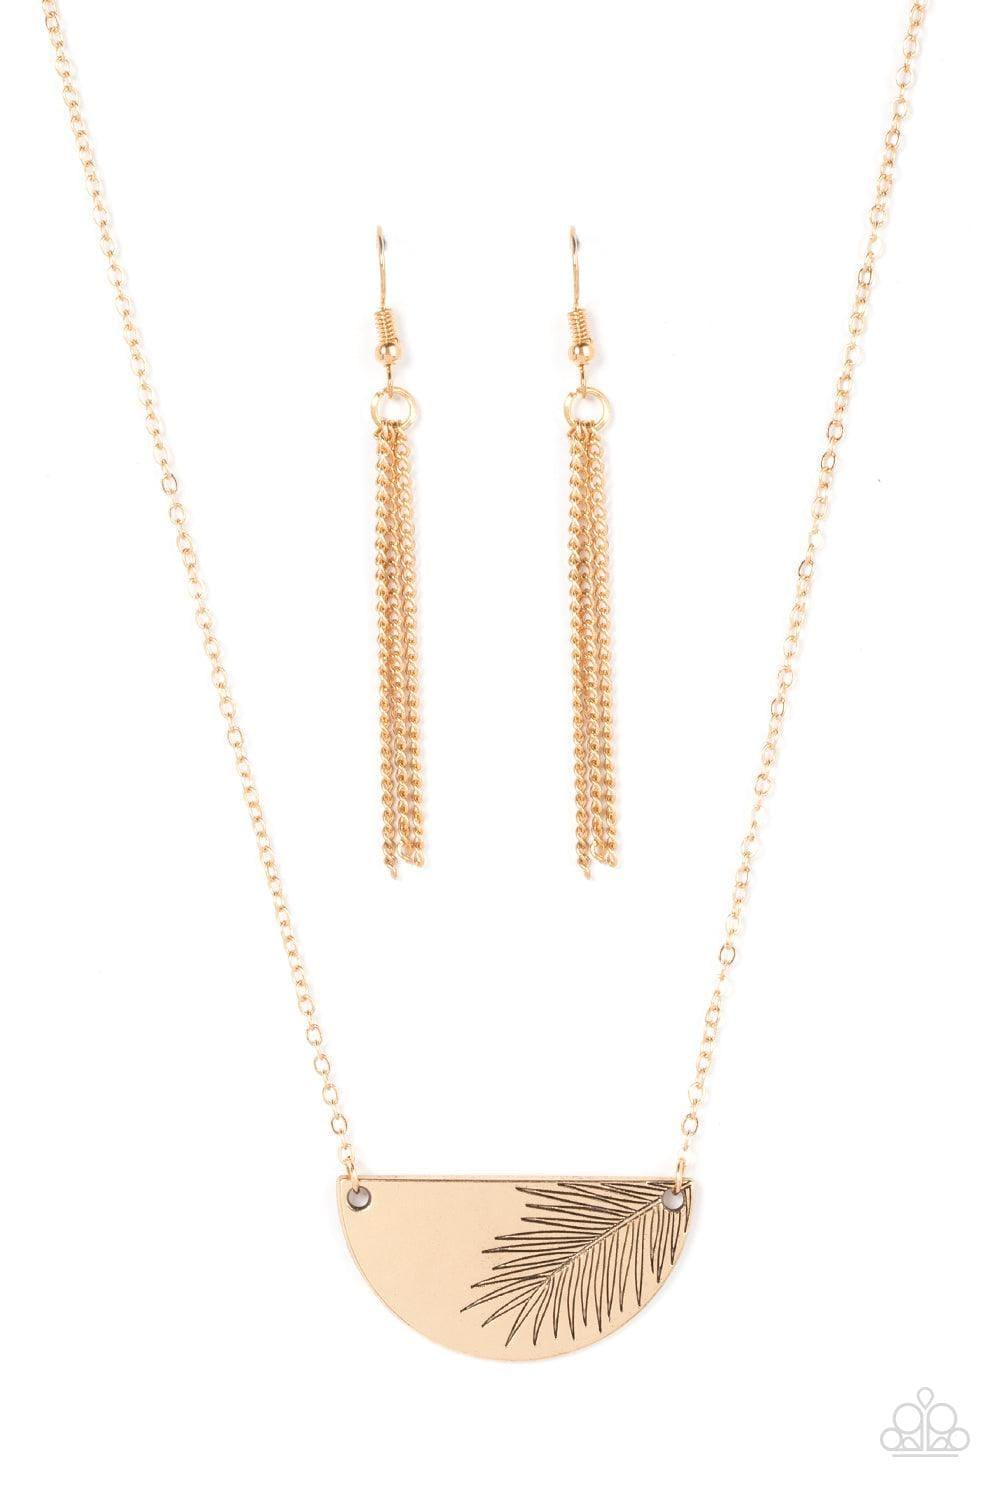 Paparazzi Accessories - Cool, Palm, And Collected - Gold Necklace - Bling by JessieK